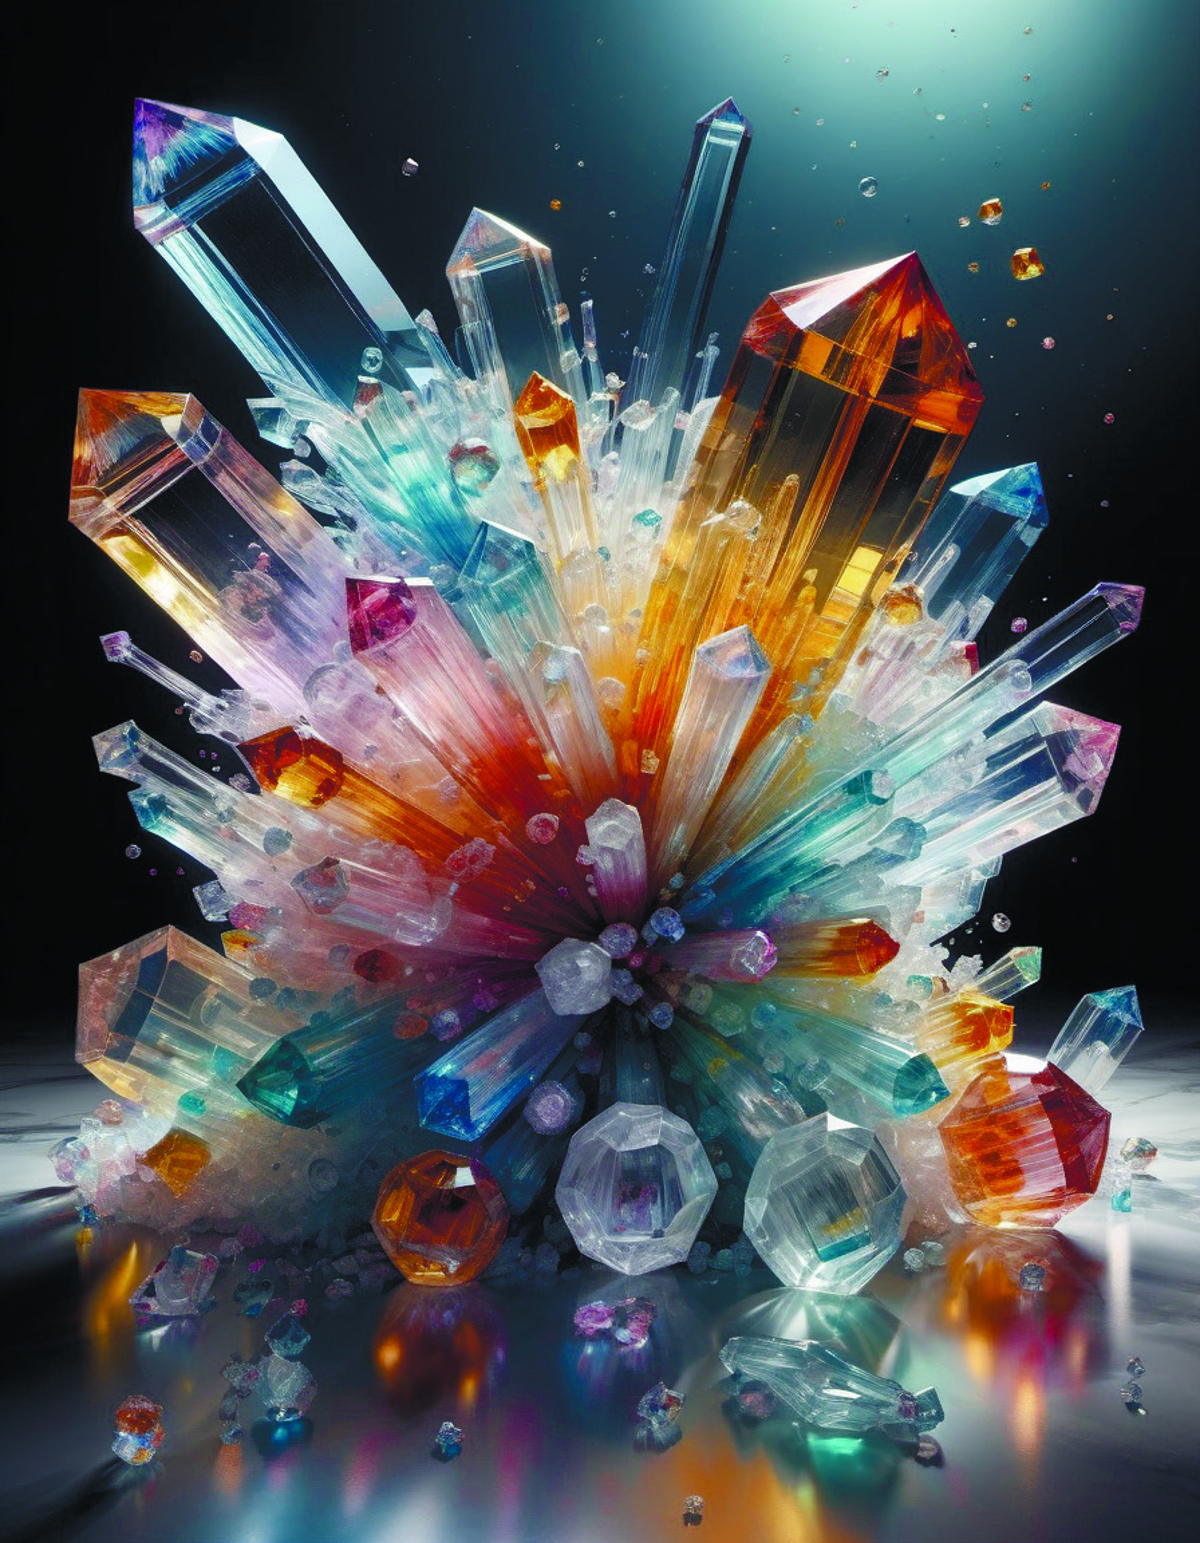 Crystal Cluster Explosion: A Vibrant Display of Colorful Gems